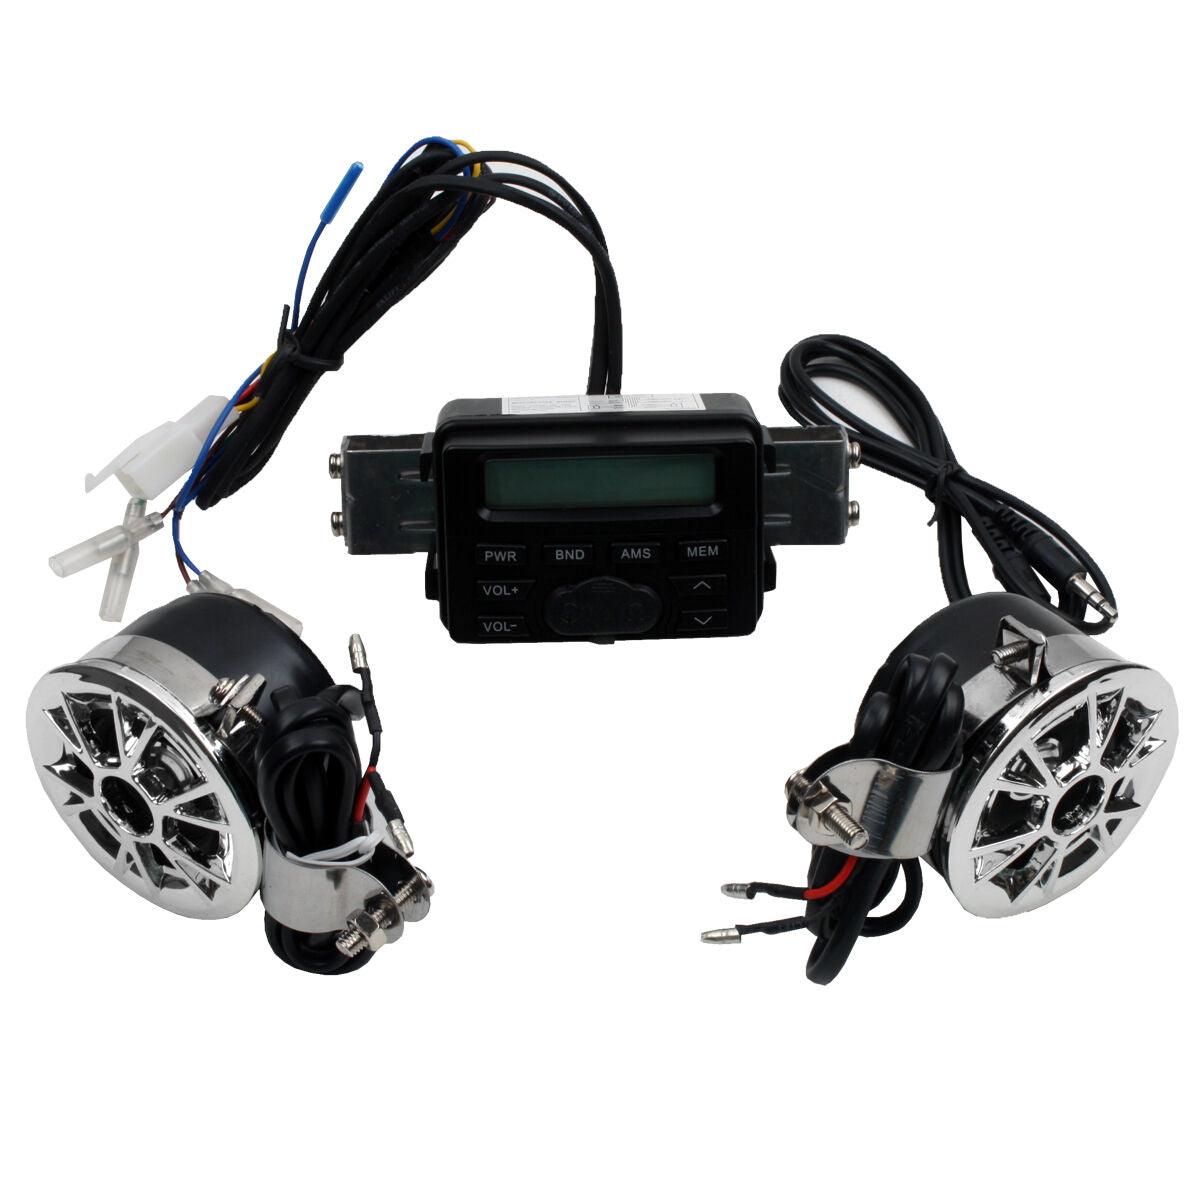 ATV Bike Audio System Handlebar FM Radio Stereo MP3 Speakers Fit For Harley - Moto Life Products